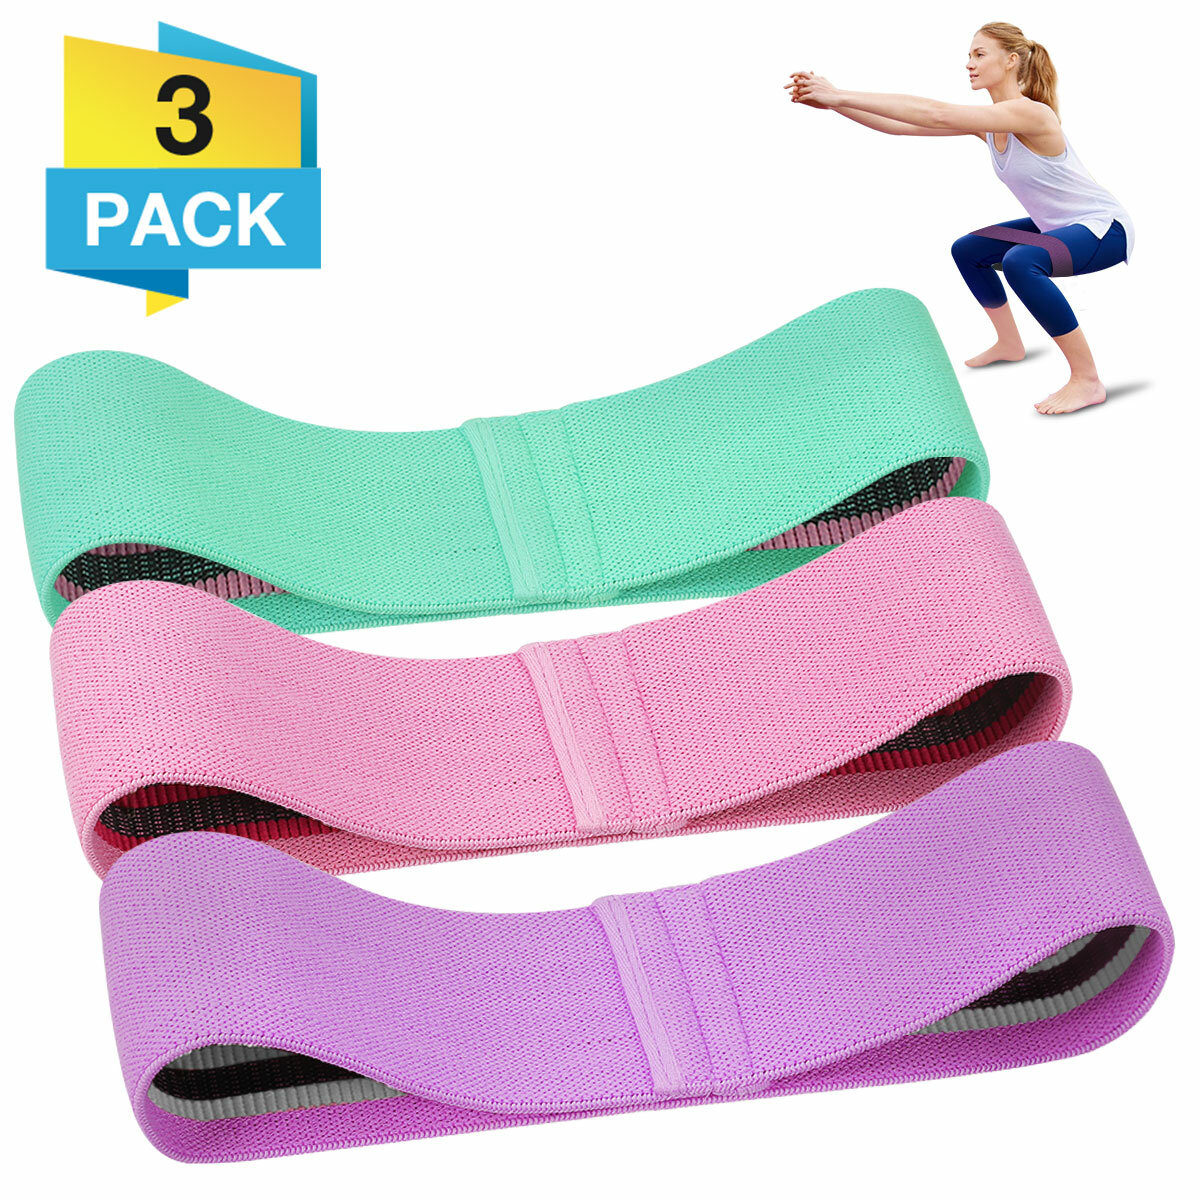 

Unisex Booty Band Hip Circle Loop Resistance Band Workout Exercise for Legs Thigh Glute Butt Squat Bands